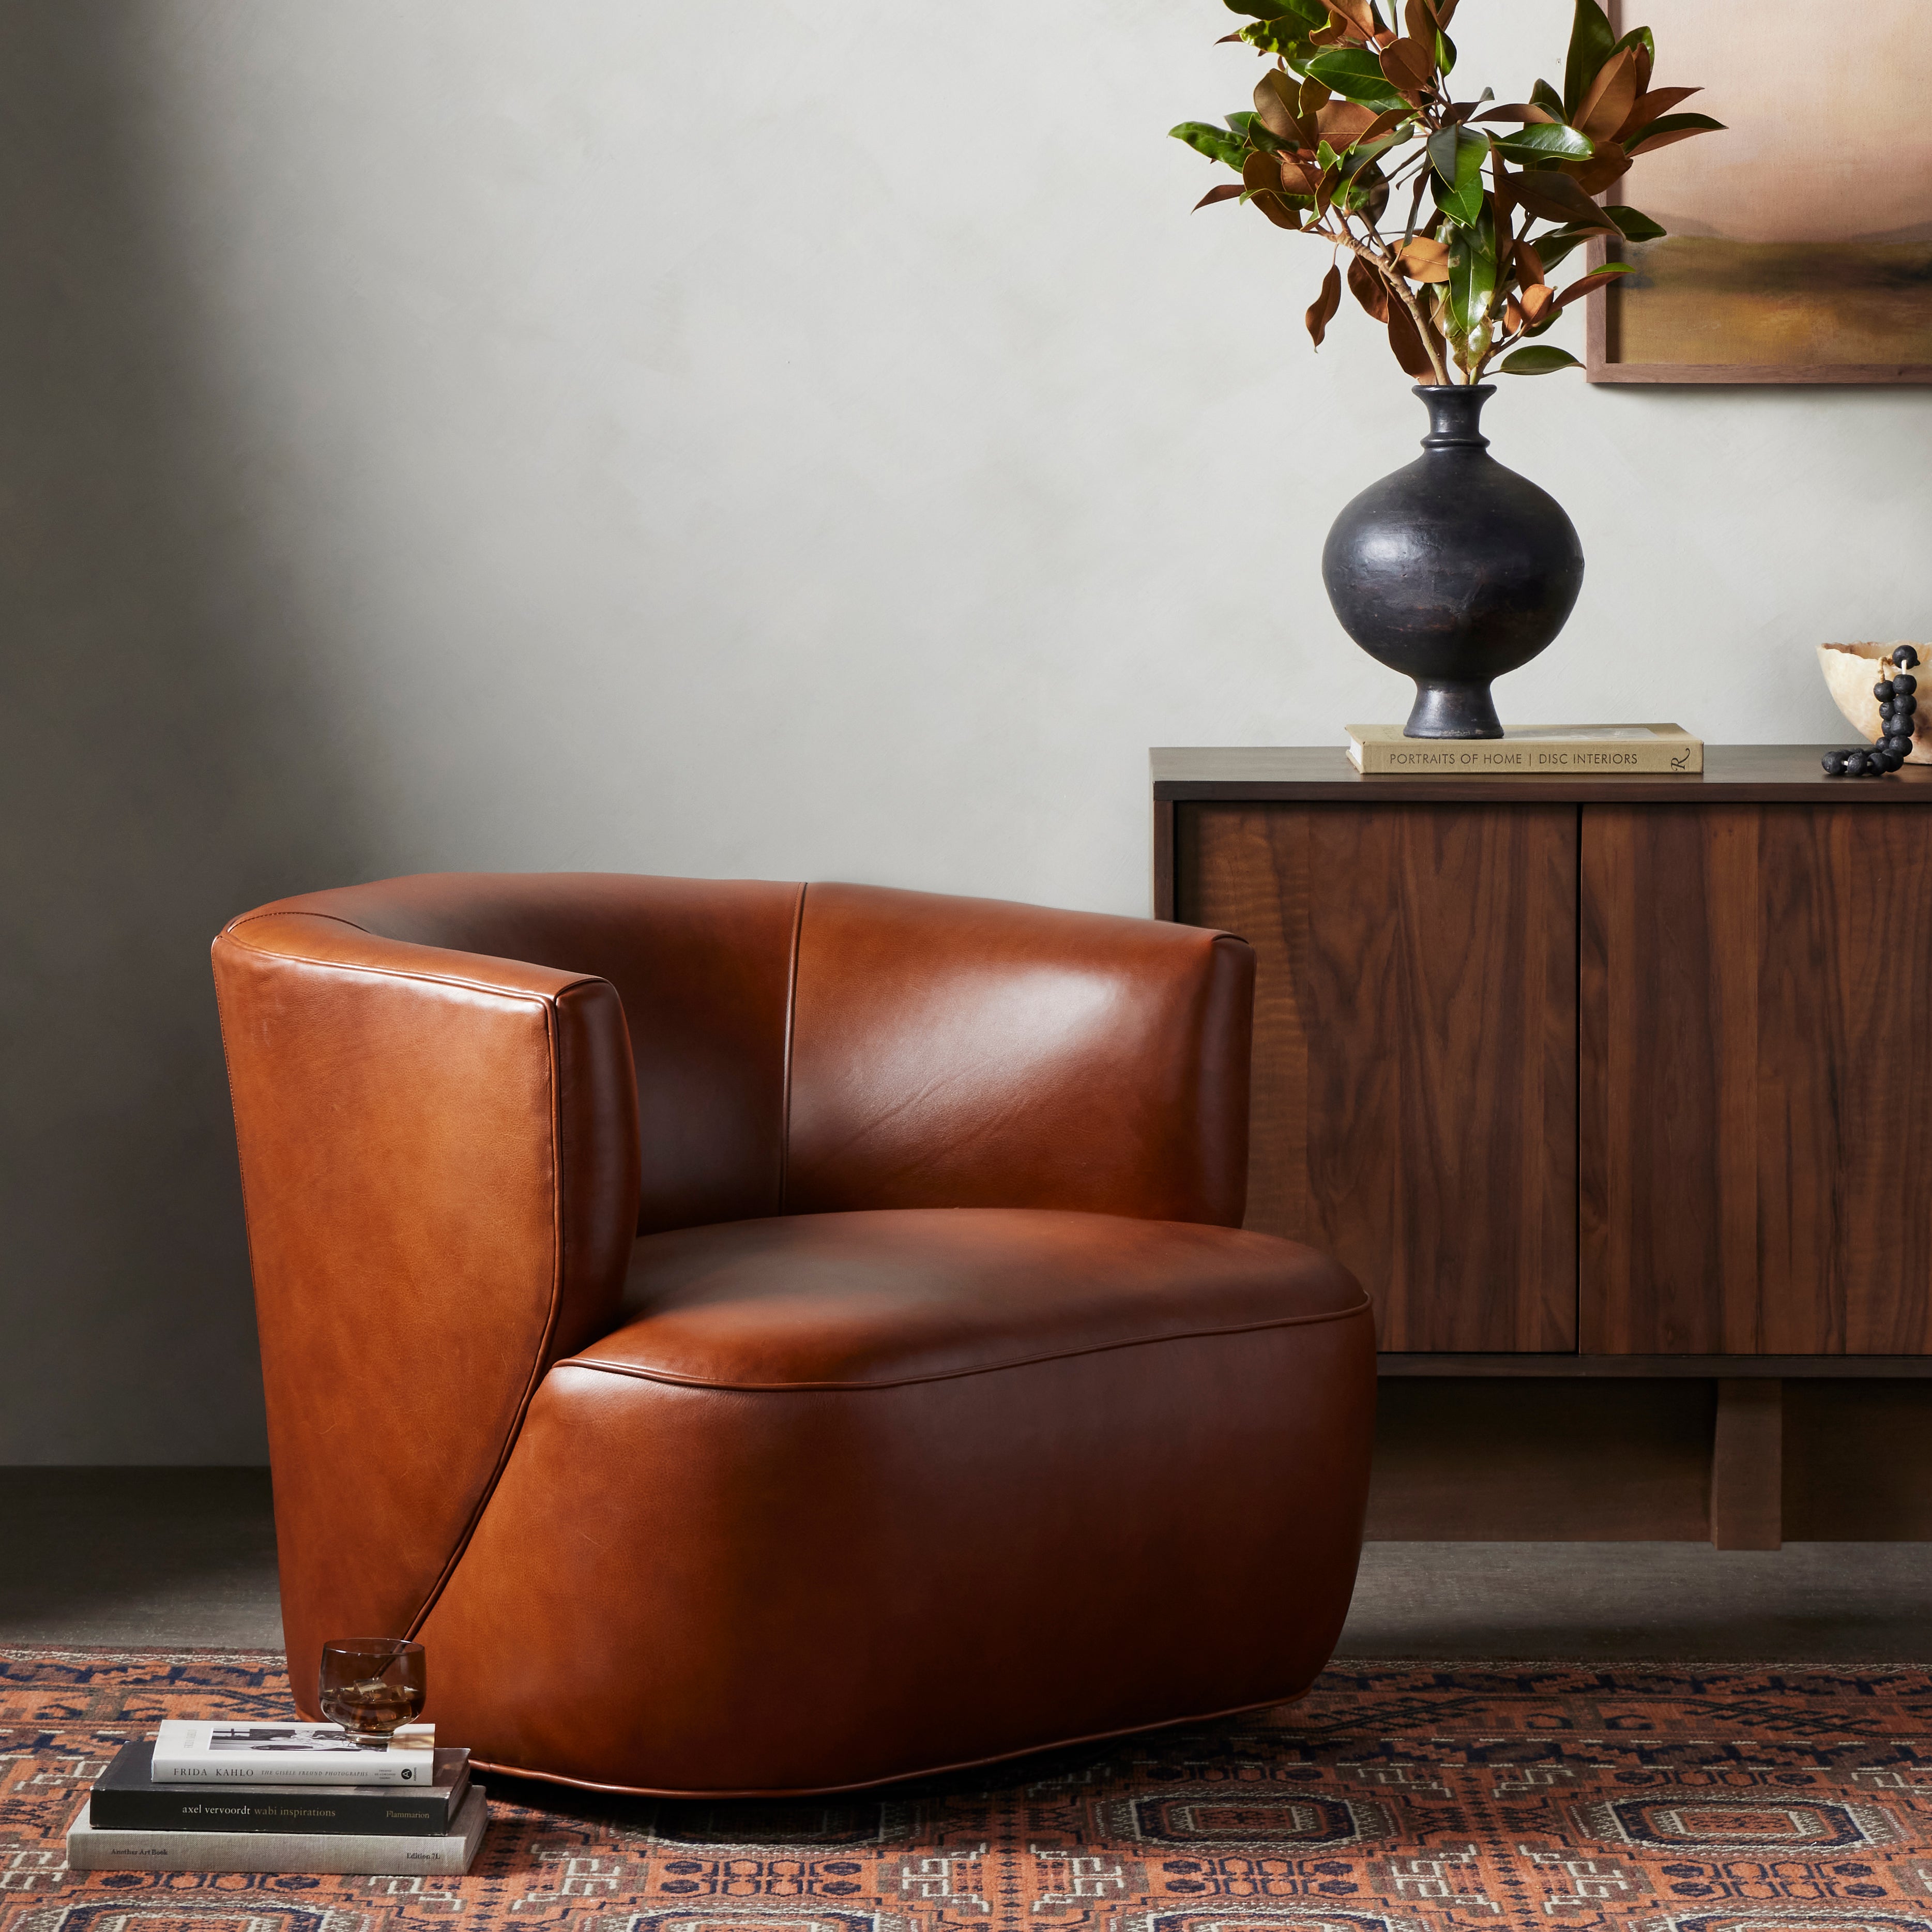 Sultry and sensible. Warm top-grain leather hugs the curves of modern-minded seating, with a hidden swivel for a functional touch. Amethyst Home provides interior design, new construction, custom furniture and area rugs in the Austin metro area